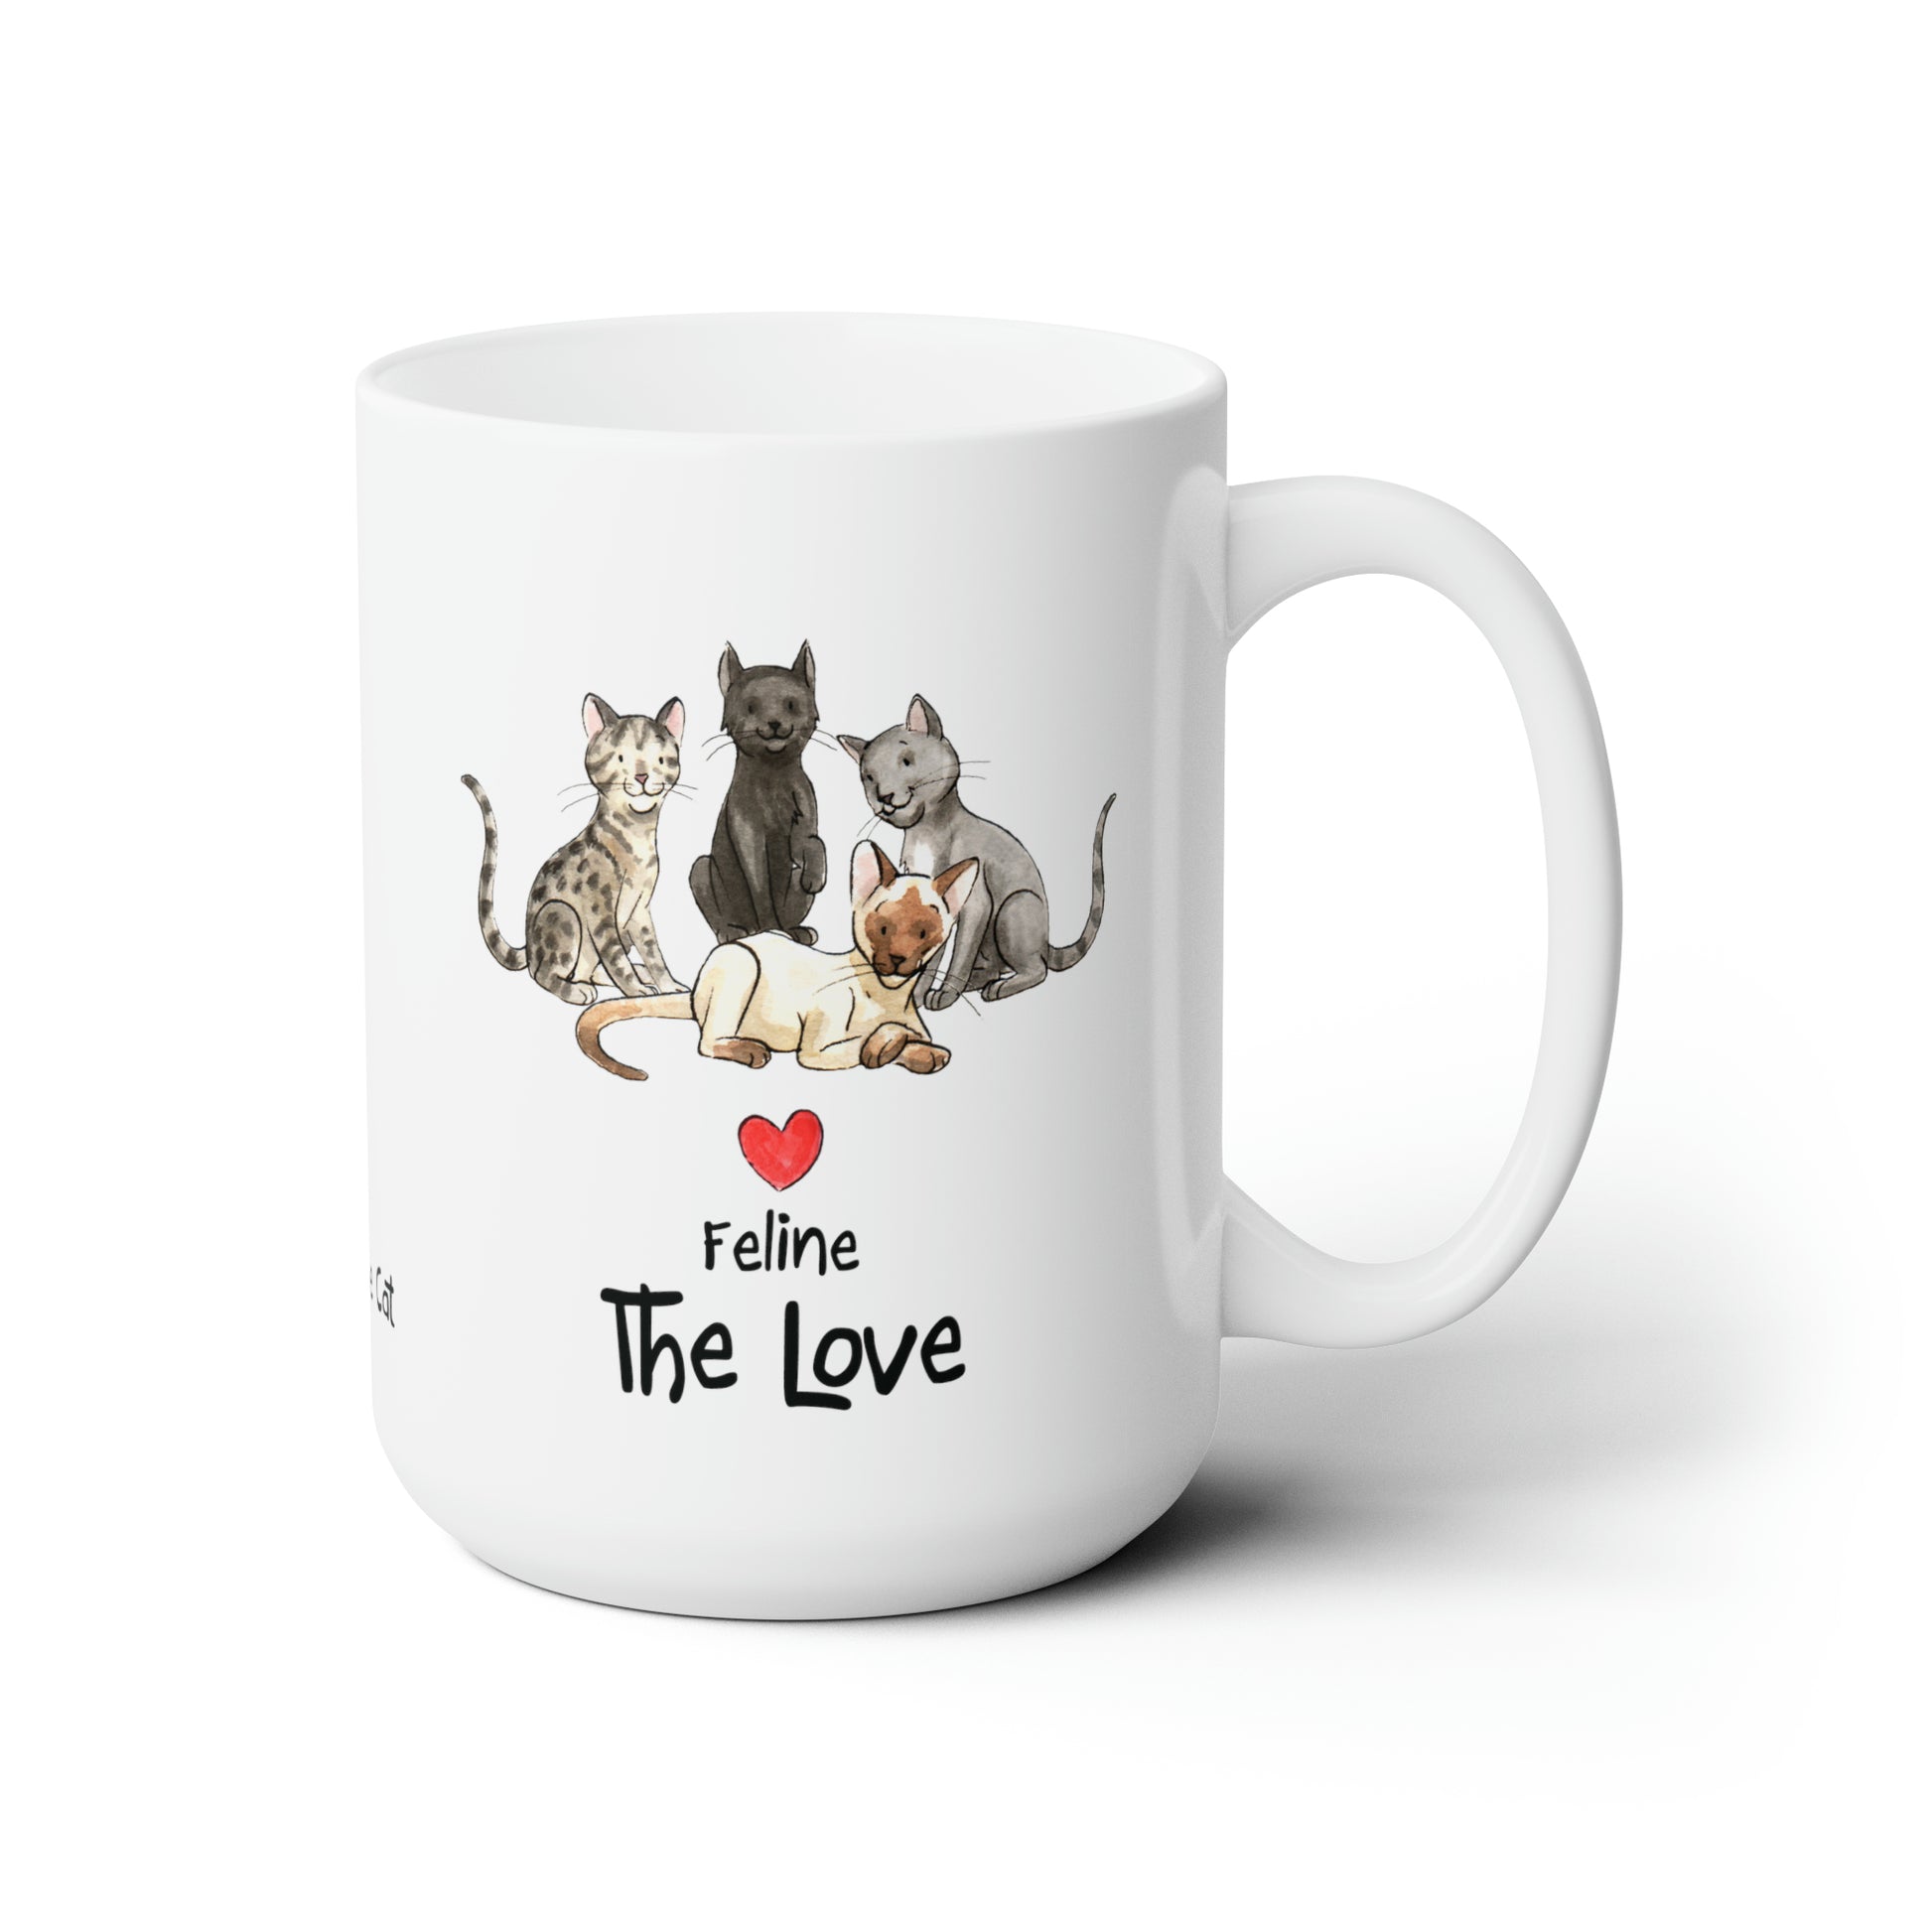 USA Matisse the cat Feline the Love 15oz jumbo mug with the handle on the right.